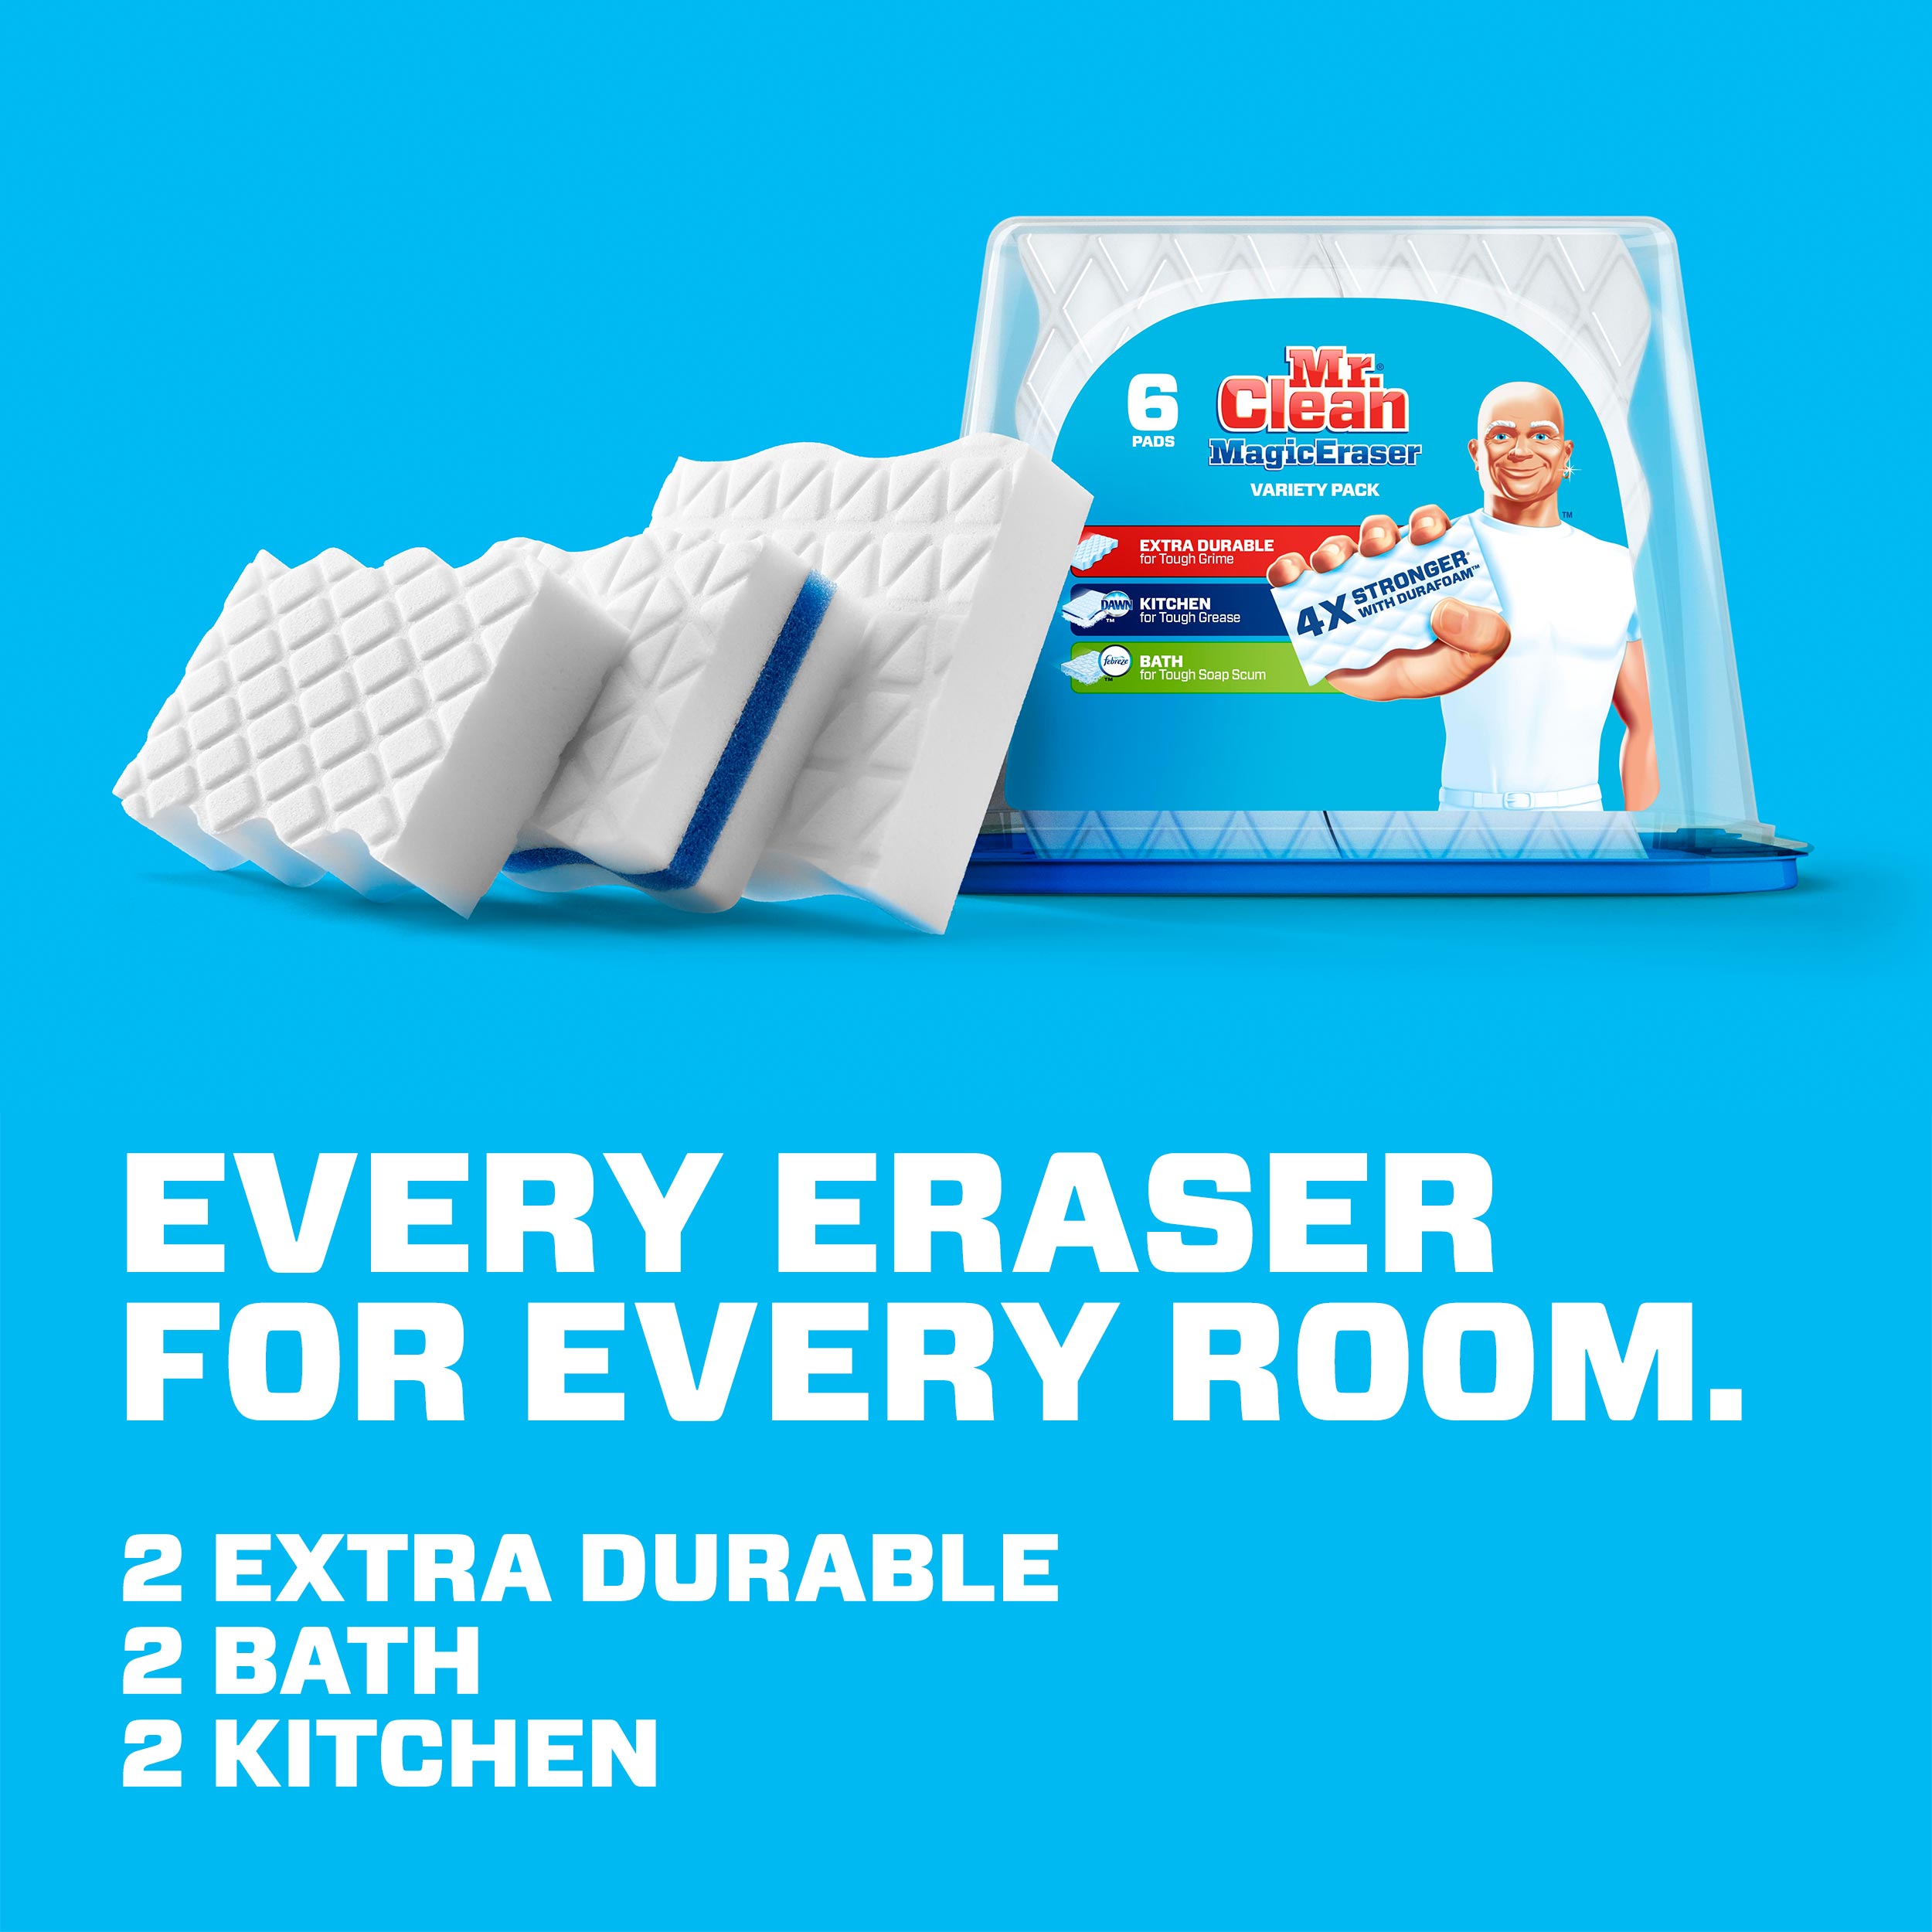 Mr. Clean Magic Eraser Cleaning Pads with Durafoam, Variety Pk, 6 Ct - image 4 of 11